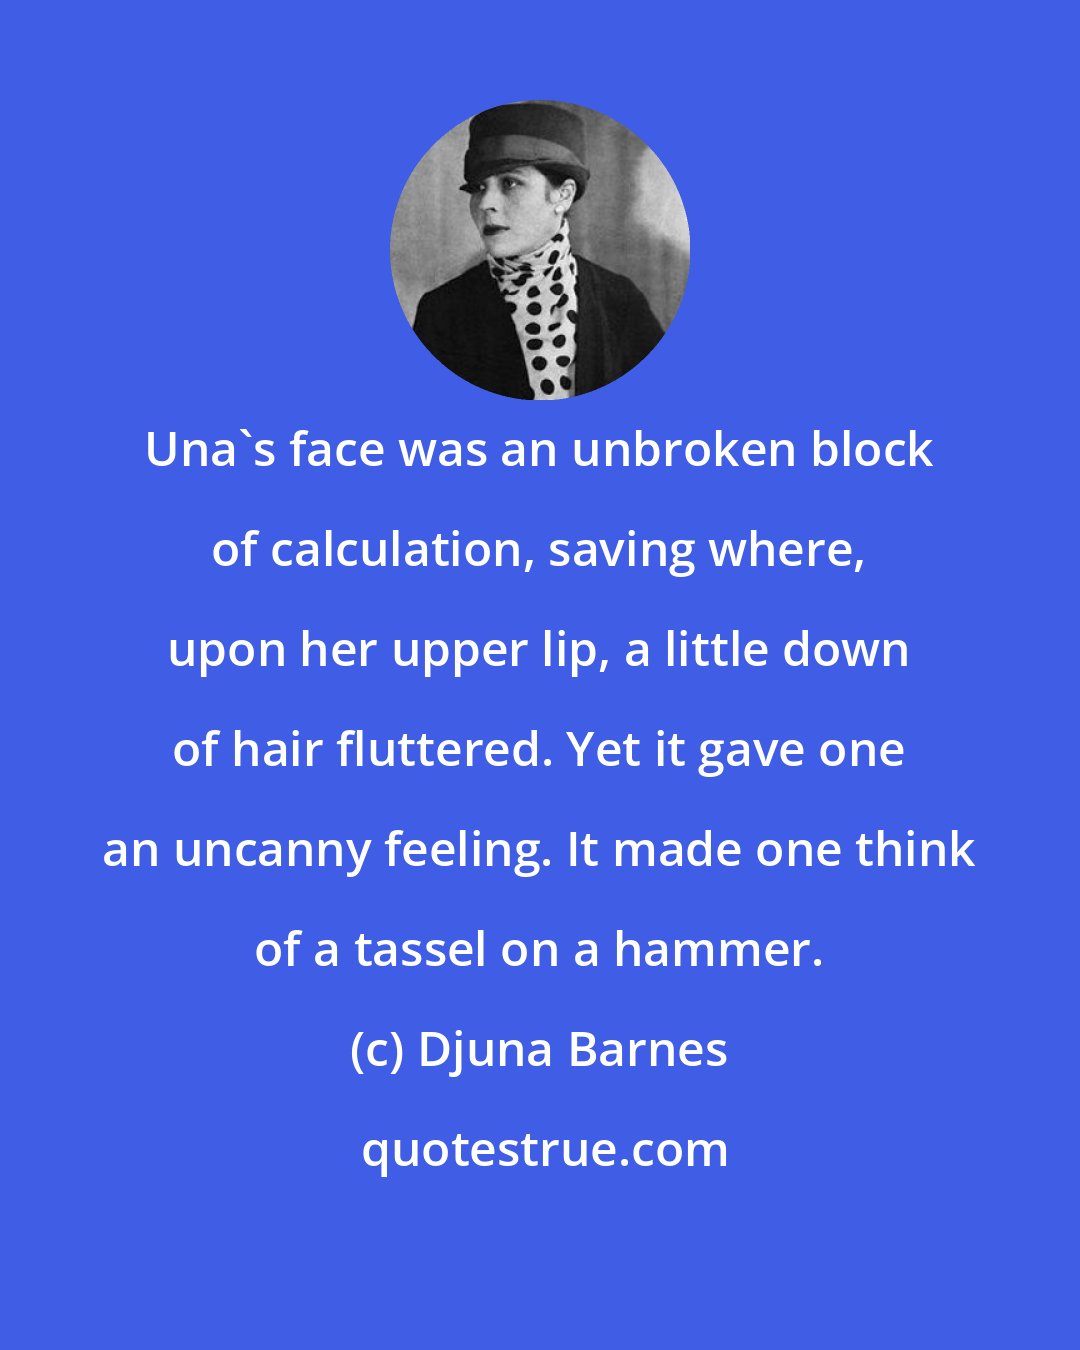 Djuna Barnes: Una's face was an unbroken block of calculation, saving where, upon her upper lip, a little down of hair fluttered. Yet it gave one an uncanny feeling. It made one think of a tassel on a hammer.